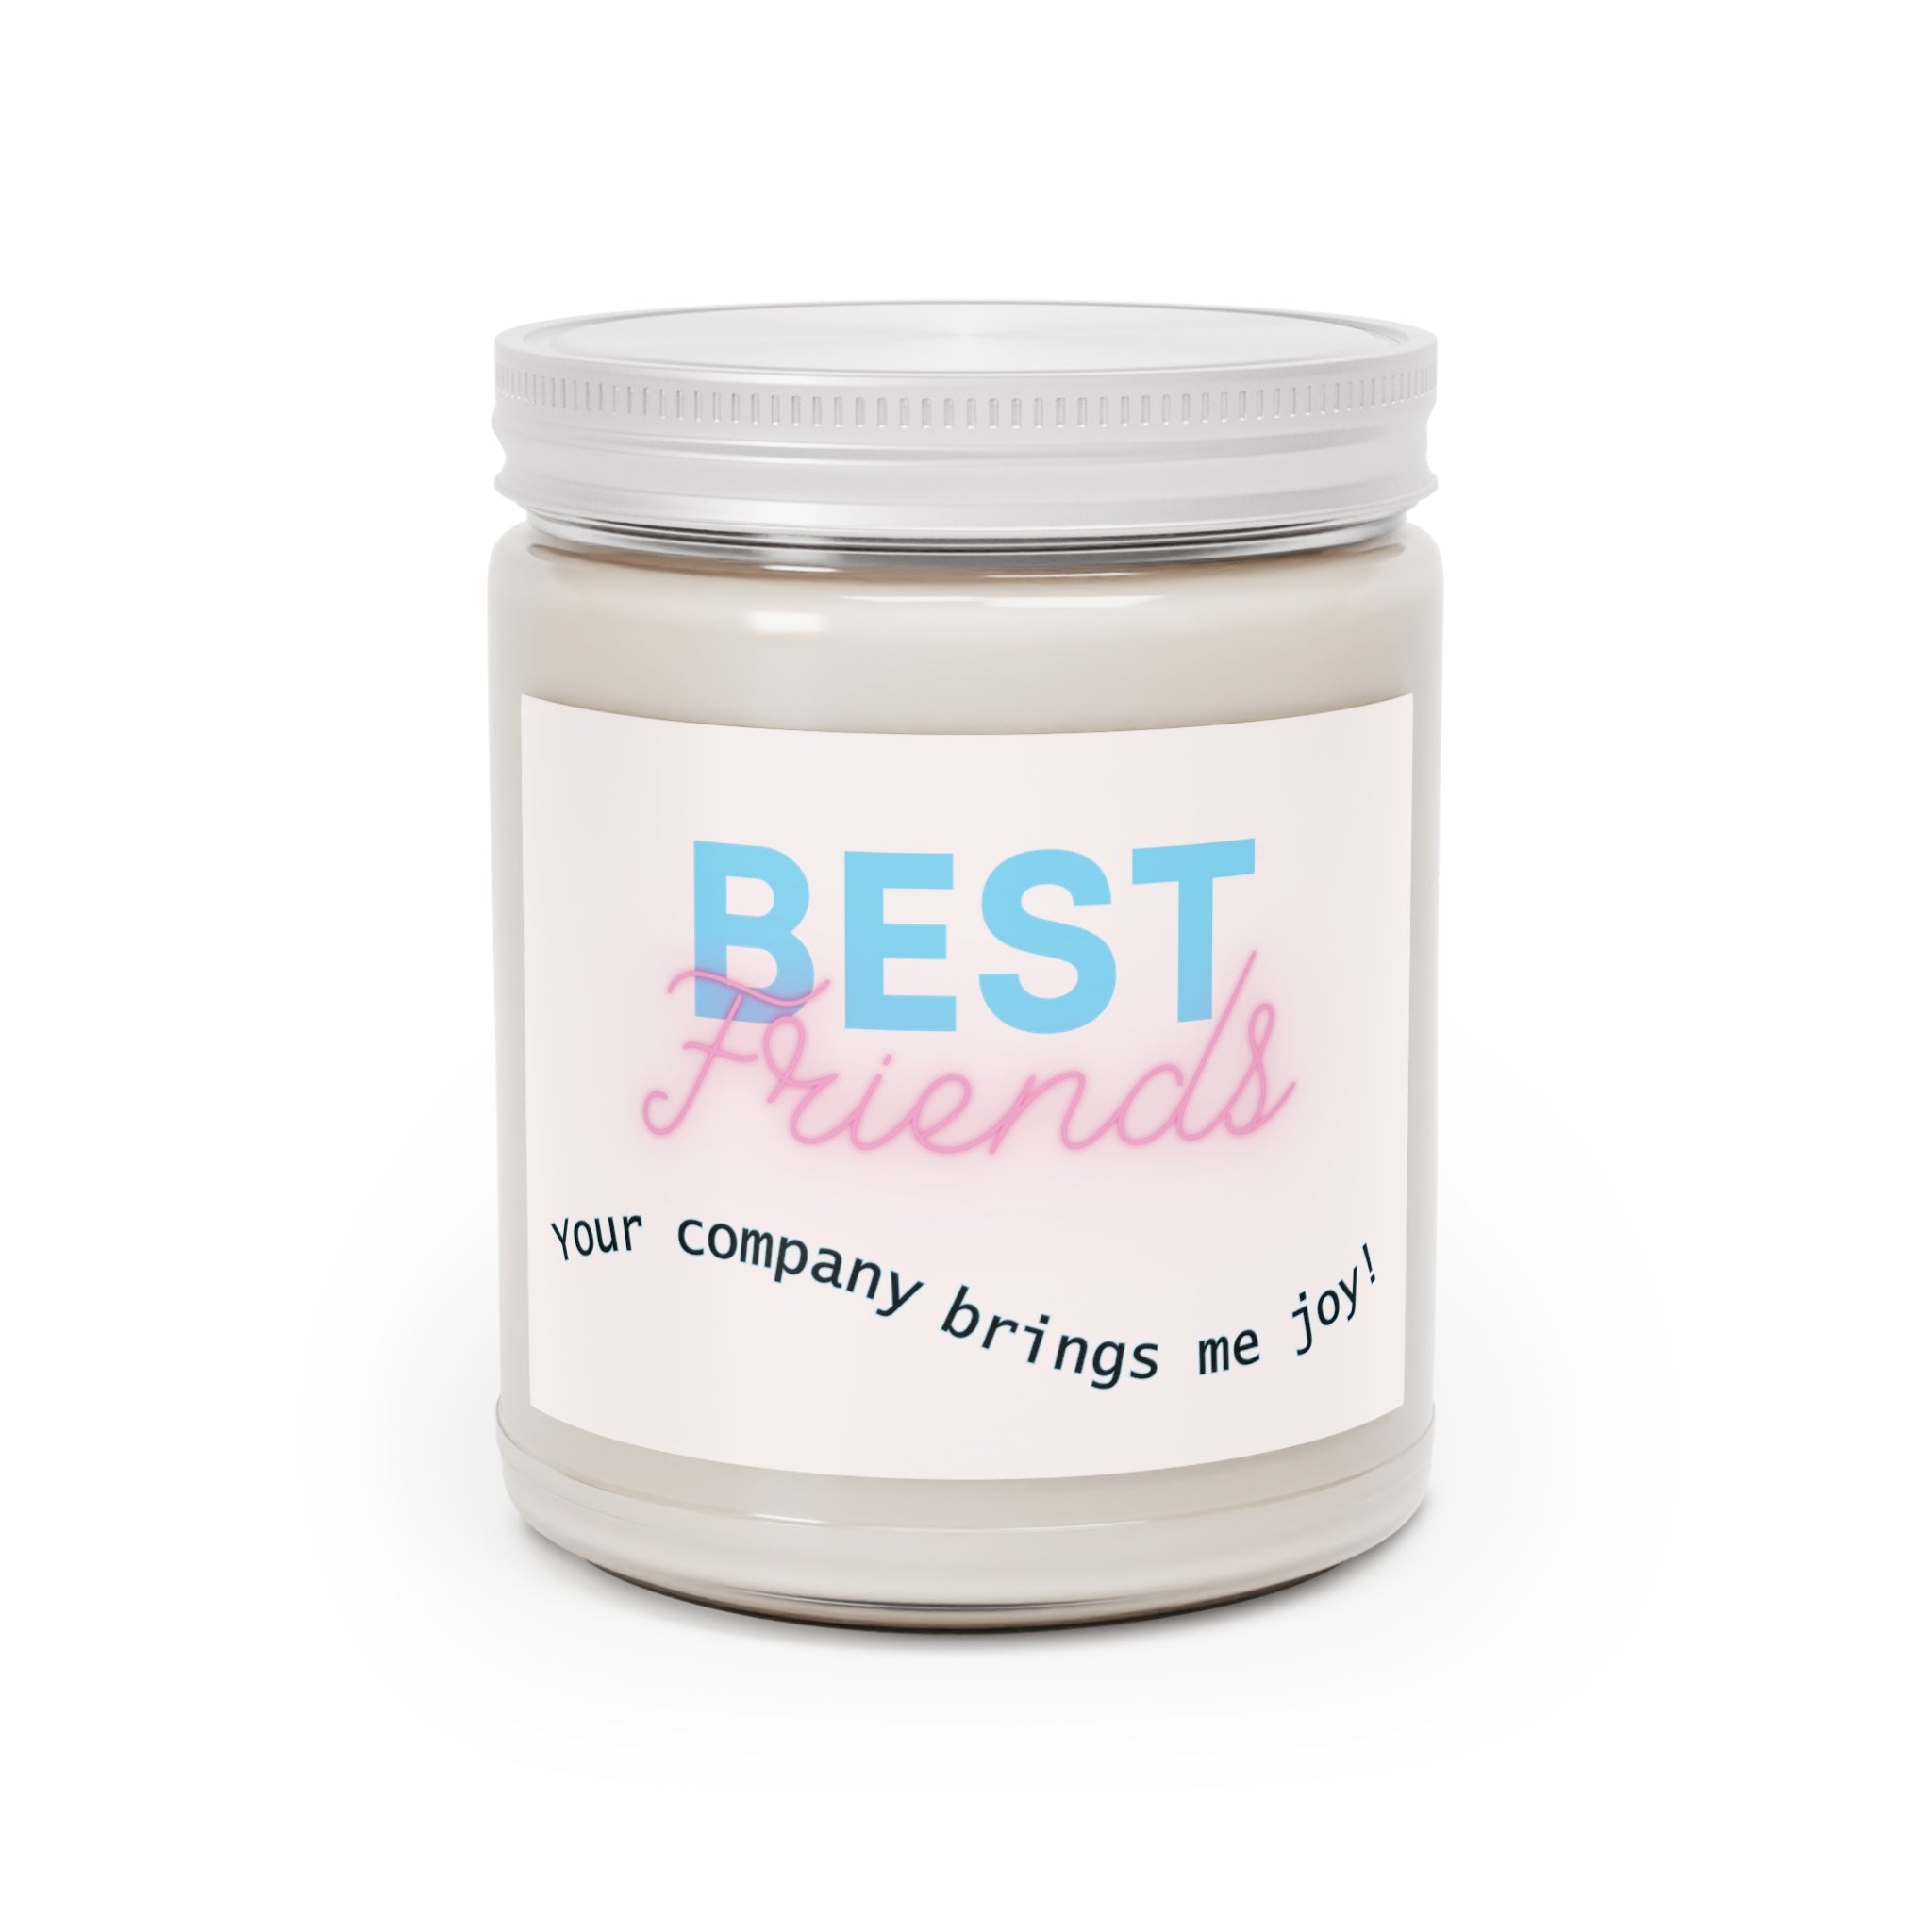 Best Friend Candle. Candle for Best Friends. Scented Candles, 9oz